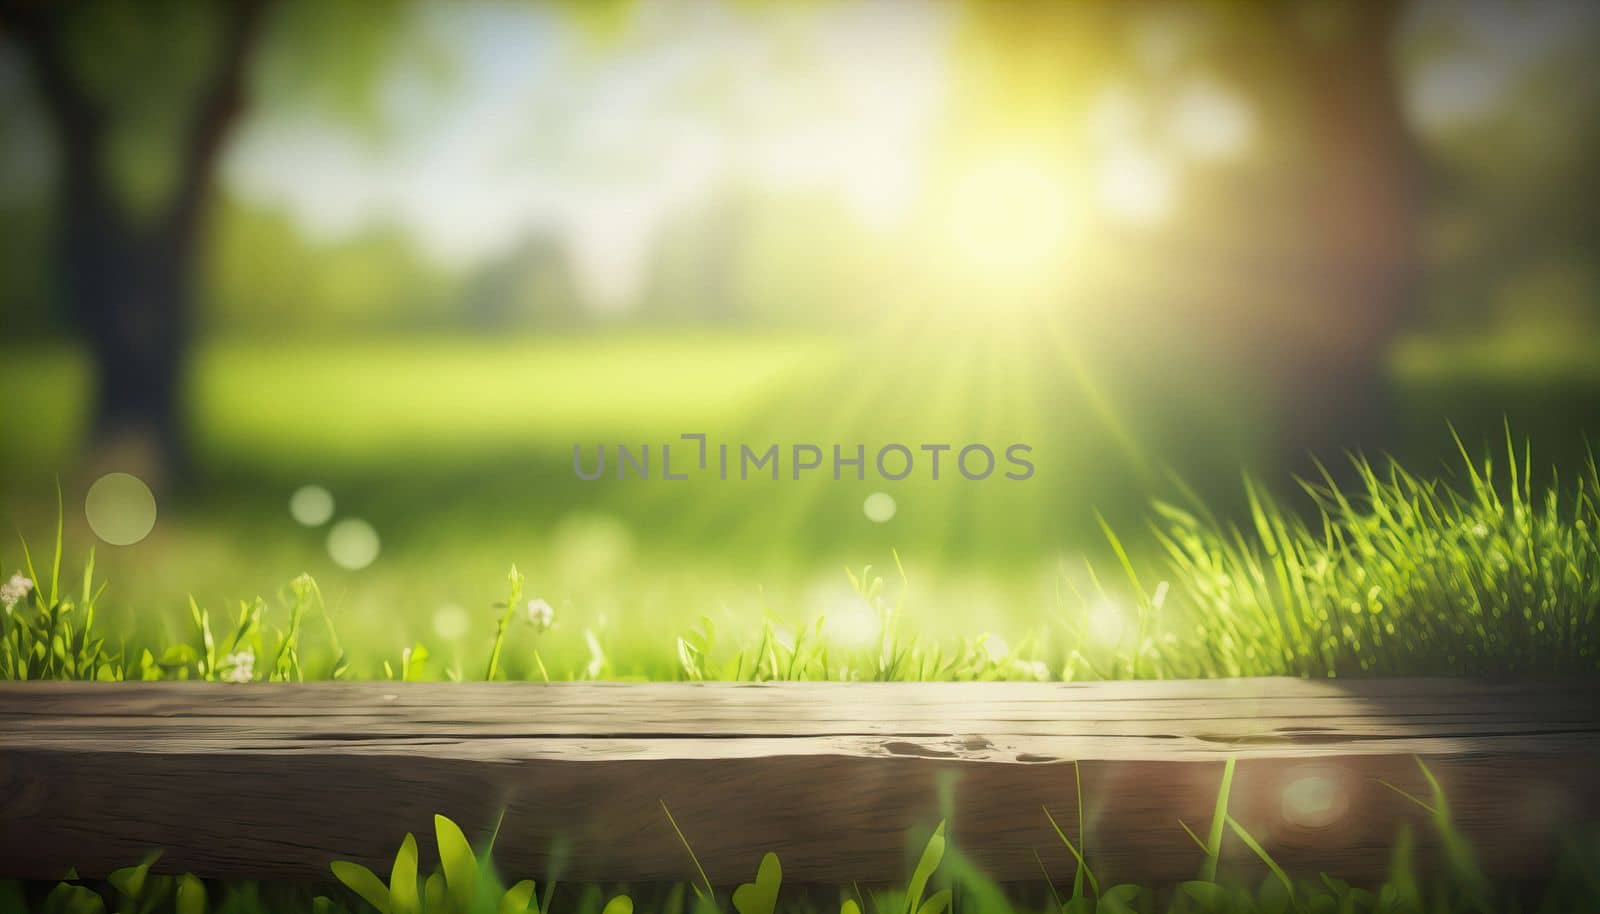 Wooden desk of free space and spring time. Beautiful spring natural background with green fresh juicy young grass and empty wooden table in nature morning outdoor. Download image